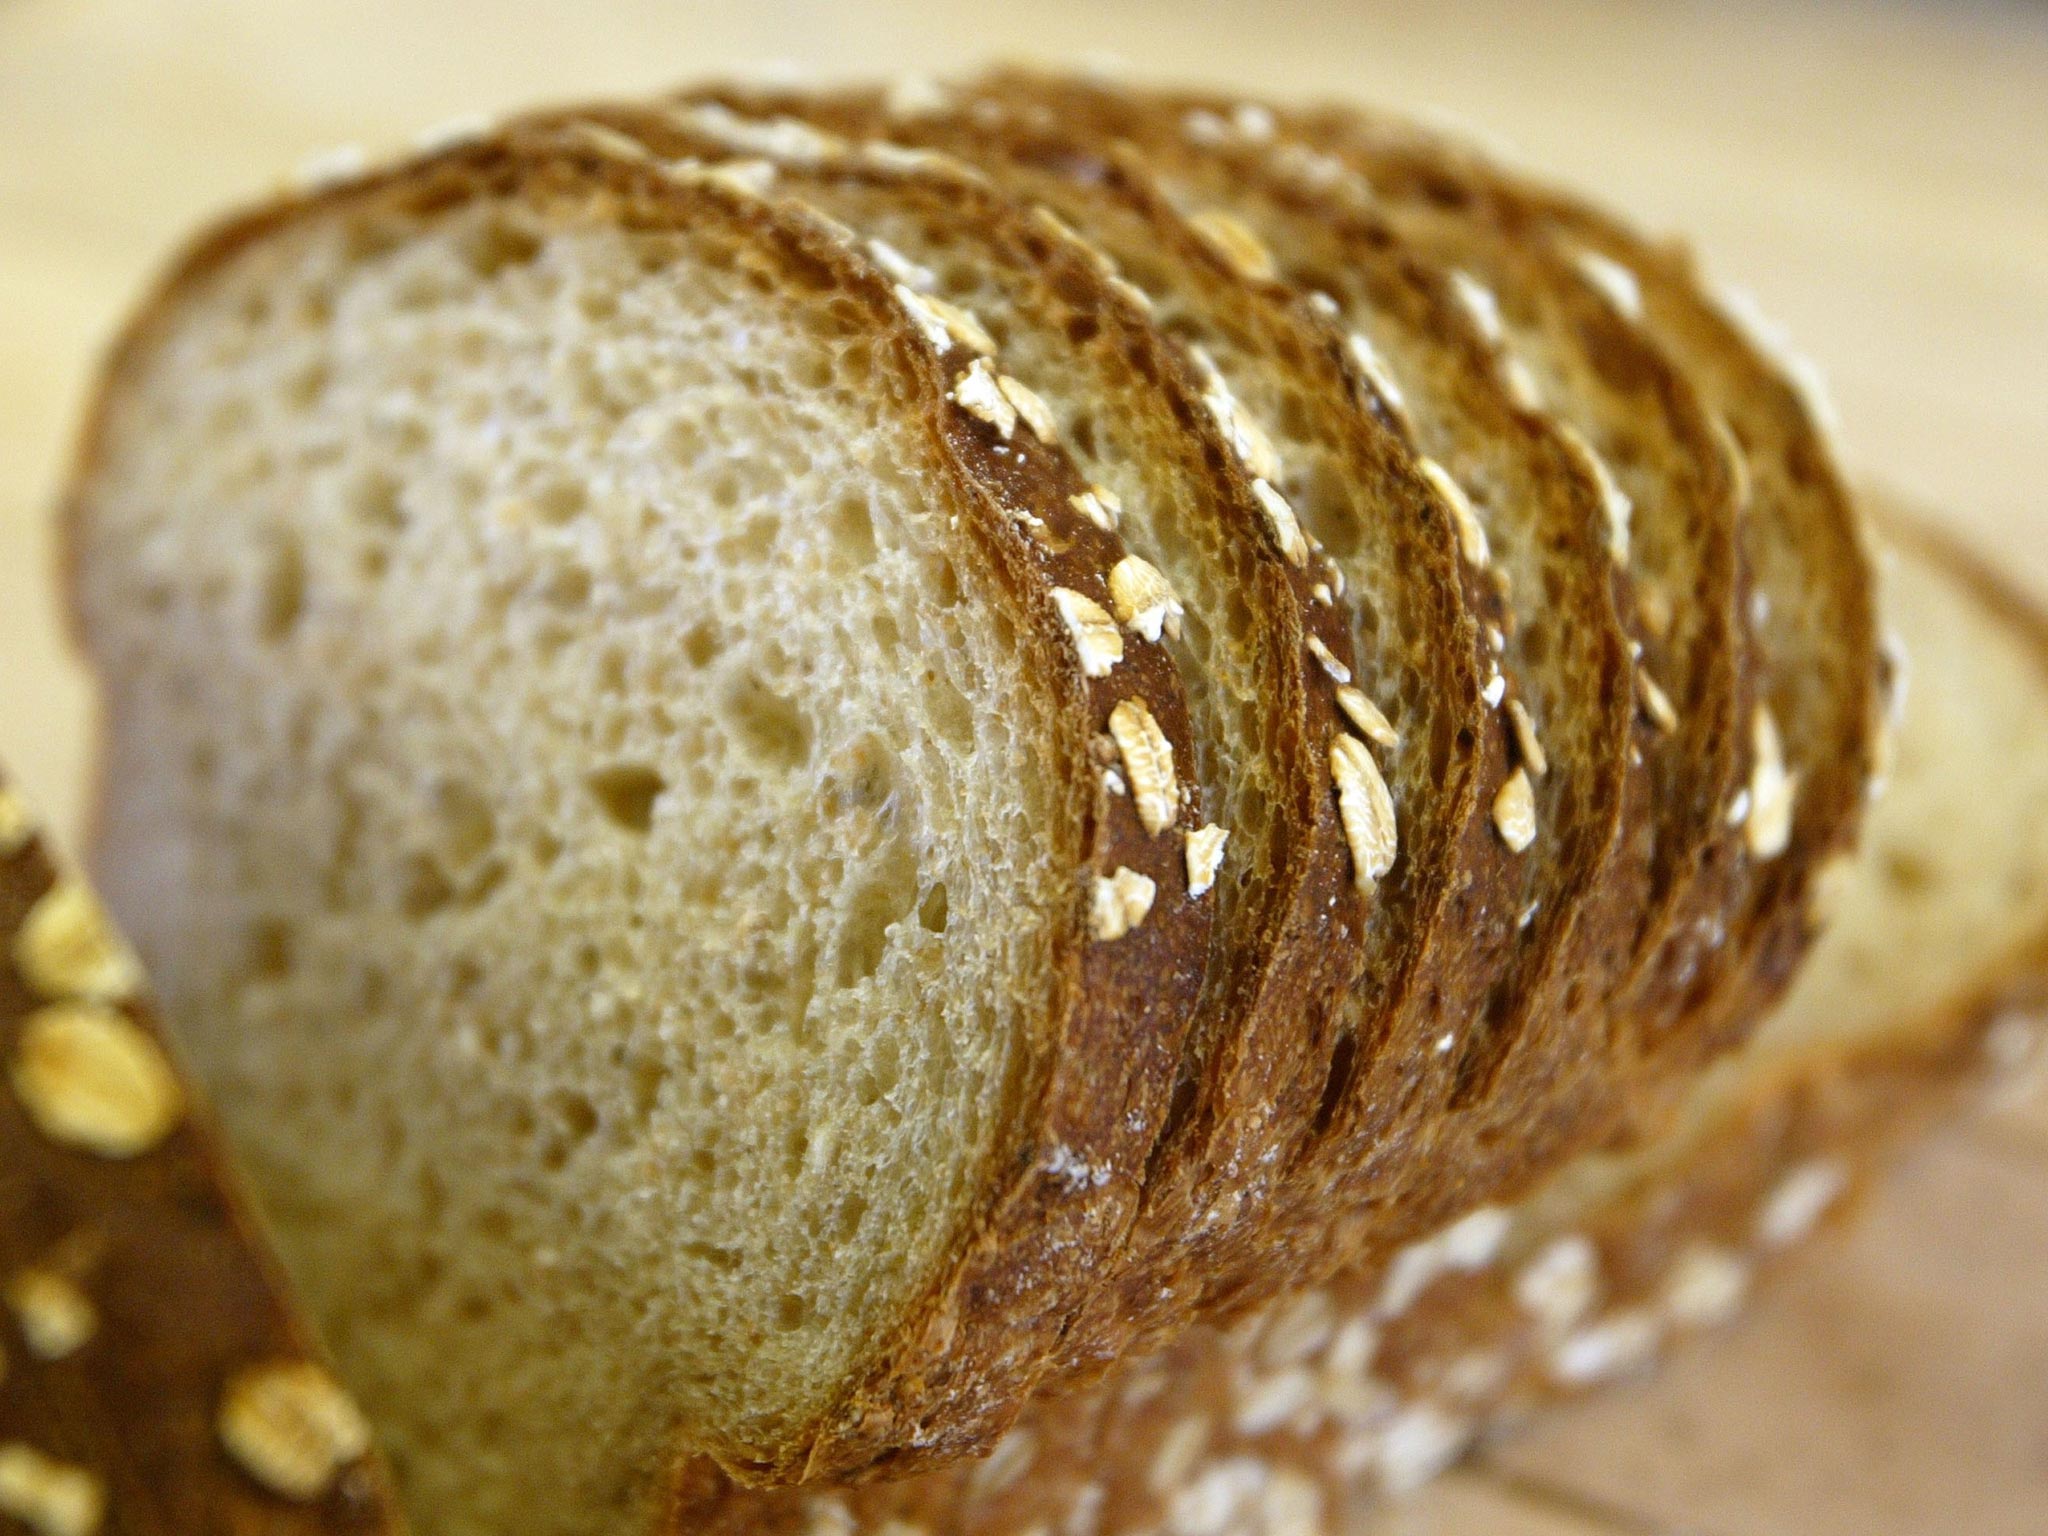 Global warming could leave loaves of bread diminished in size